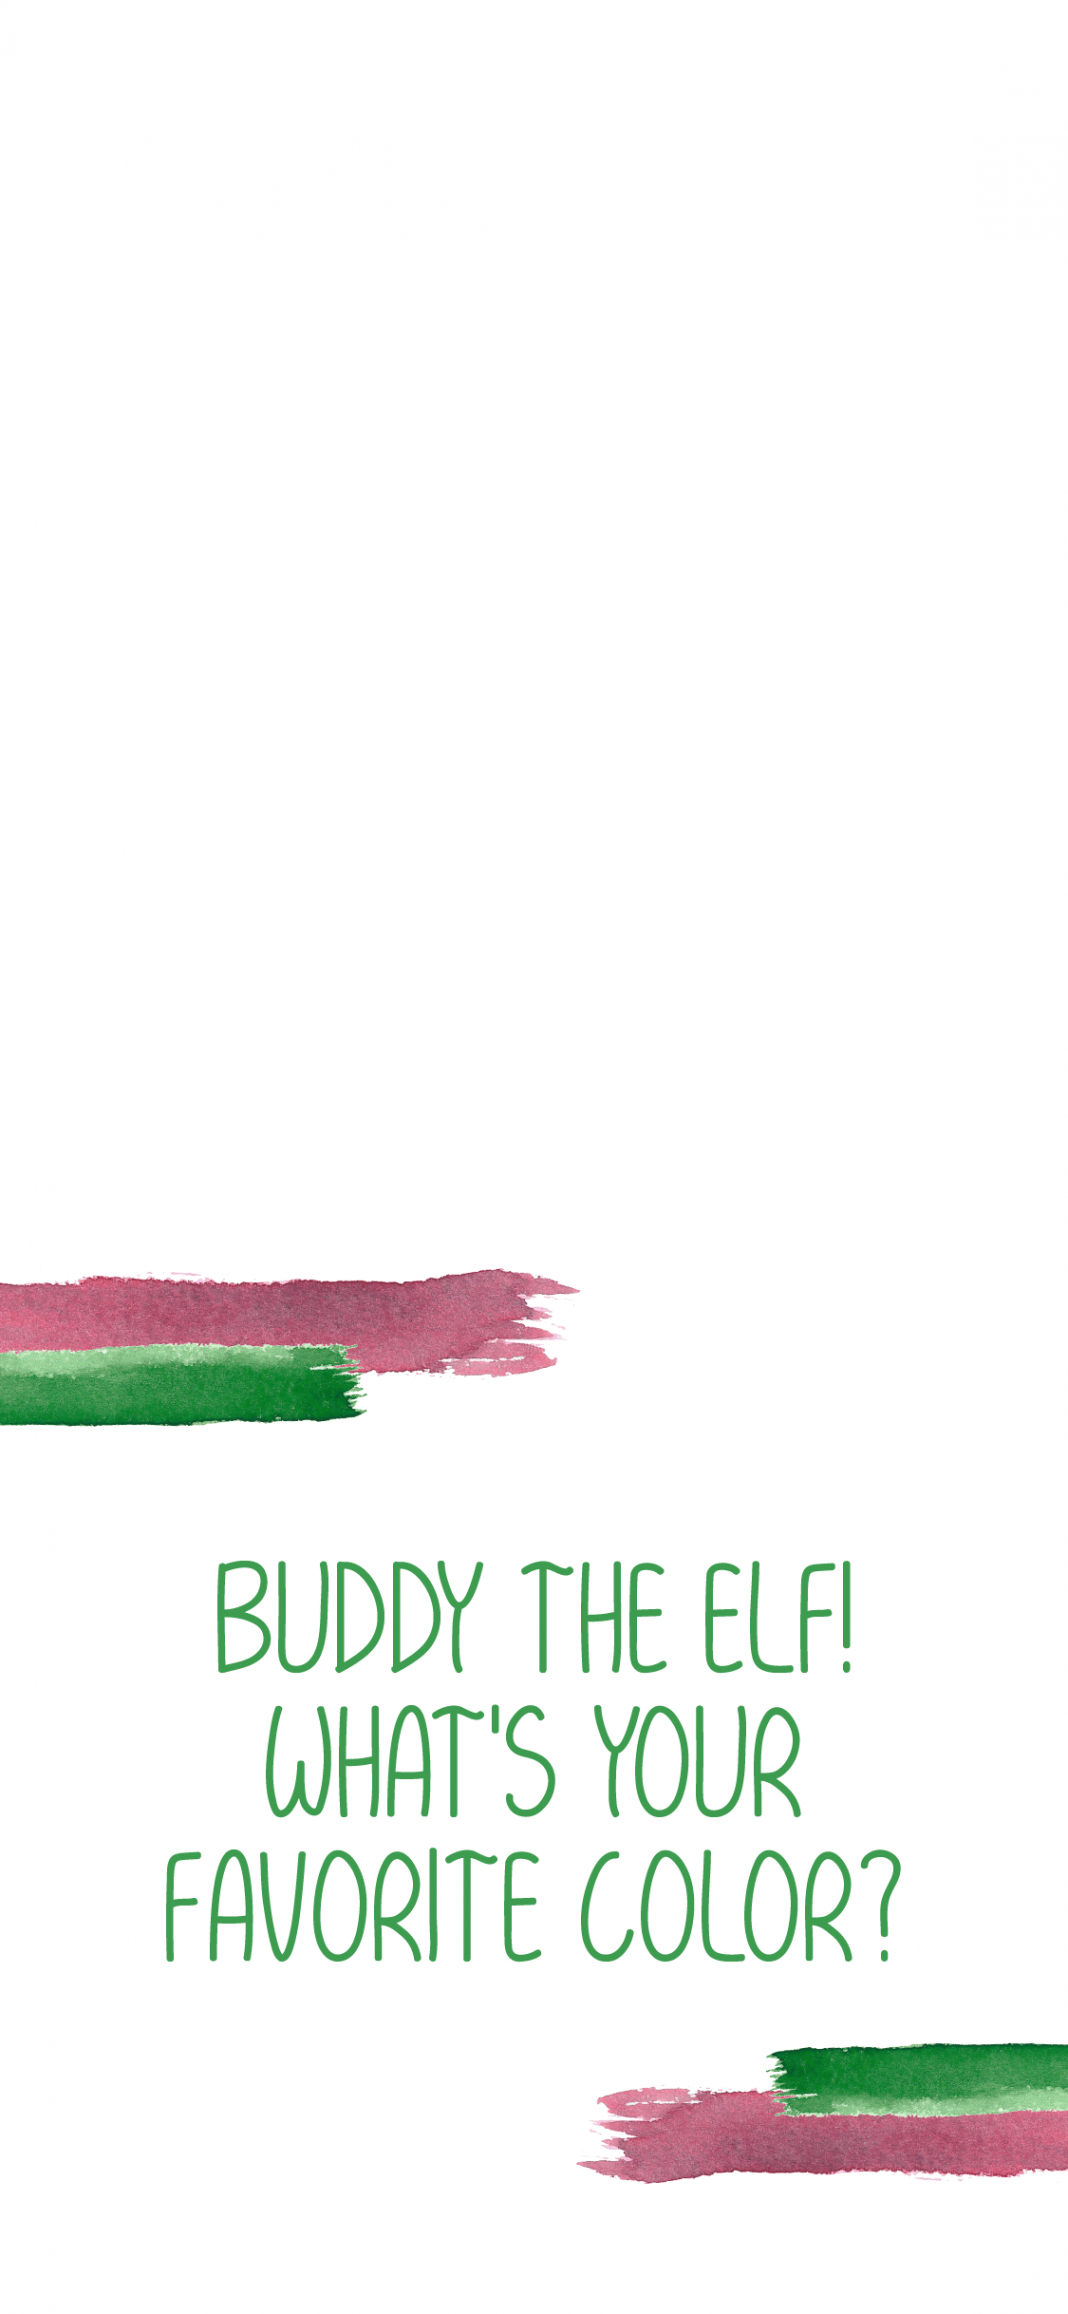 Buddy the Elf iPhone Wallpaper  Buddy the elf, Christmas dreaming